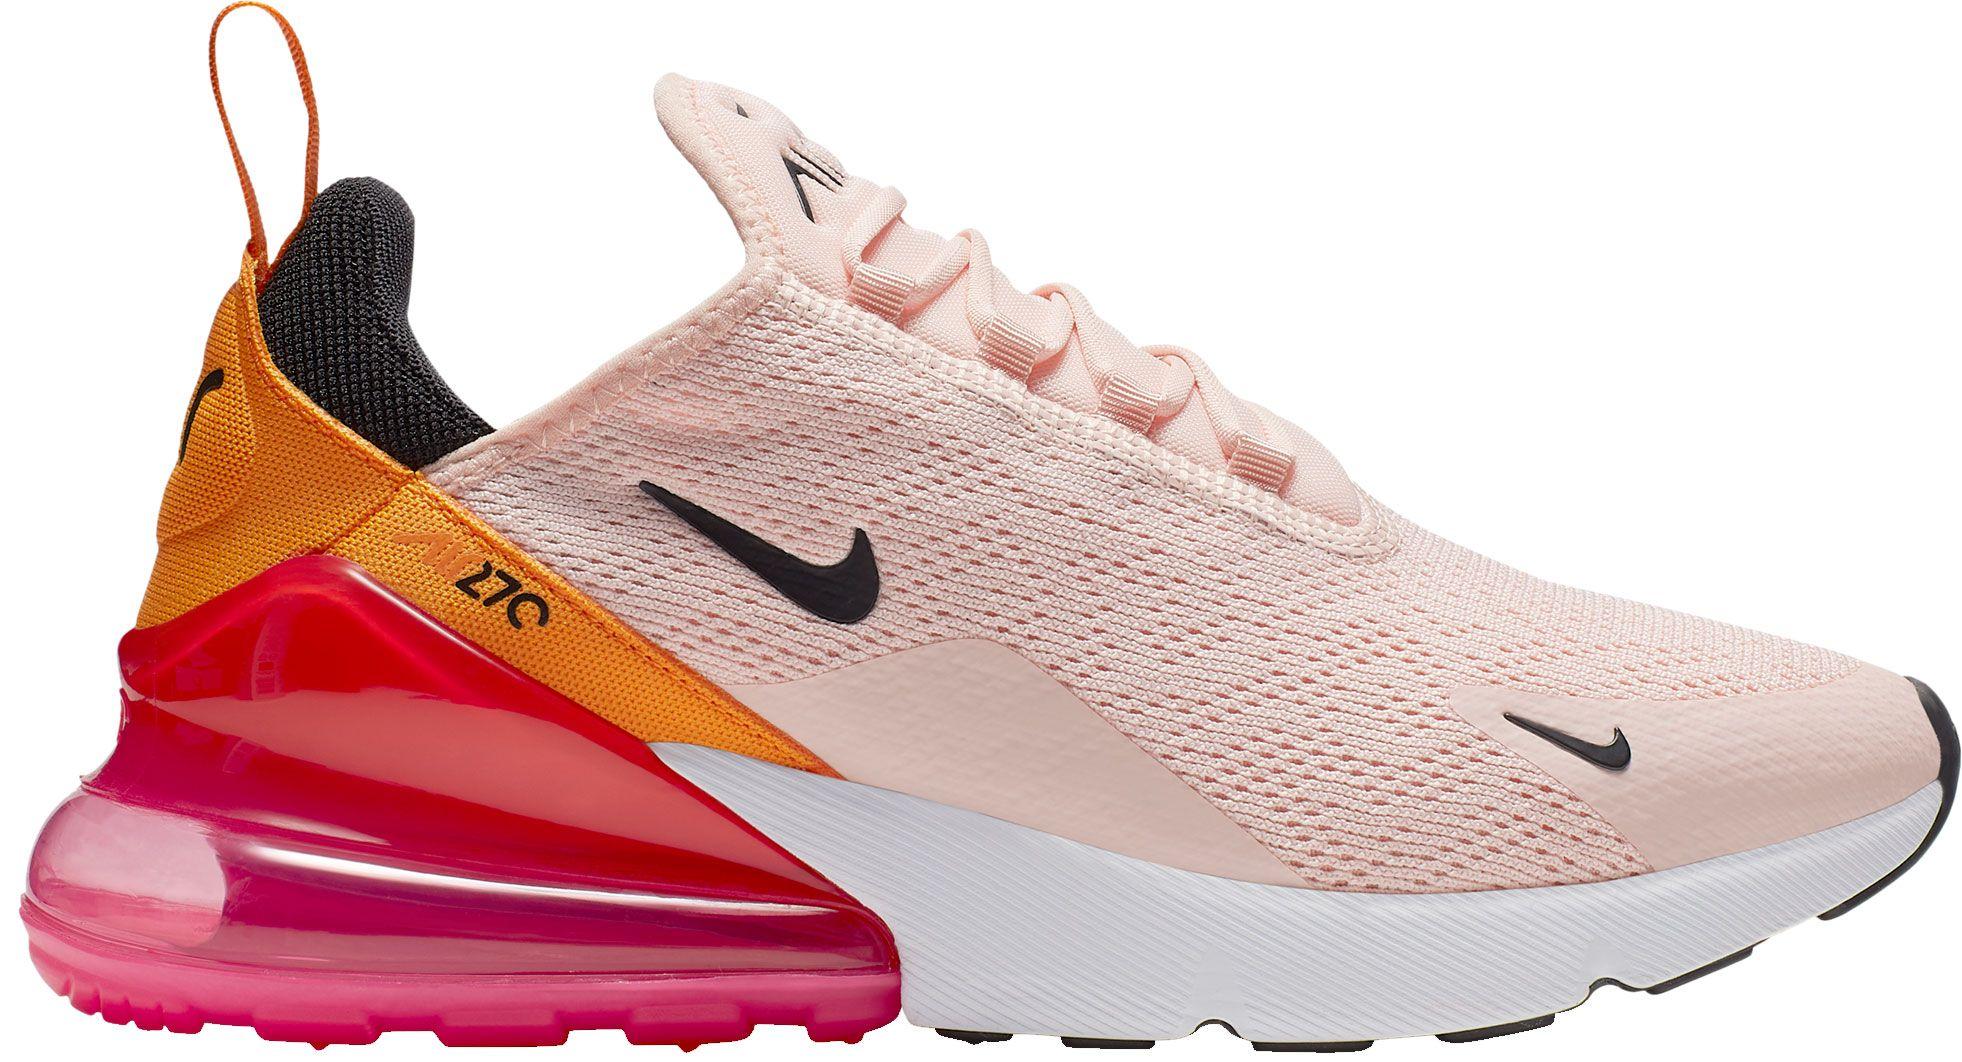 Nike Rubber Air Max 270 Shoes in Pink/Orange/Black (Pink) - Lyst